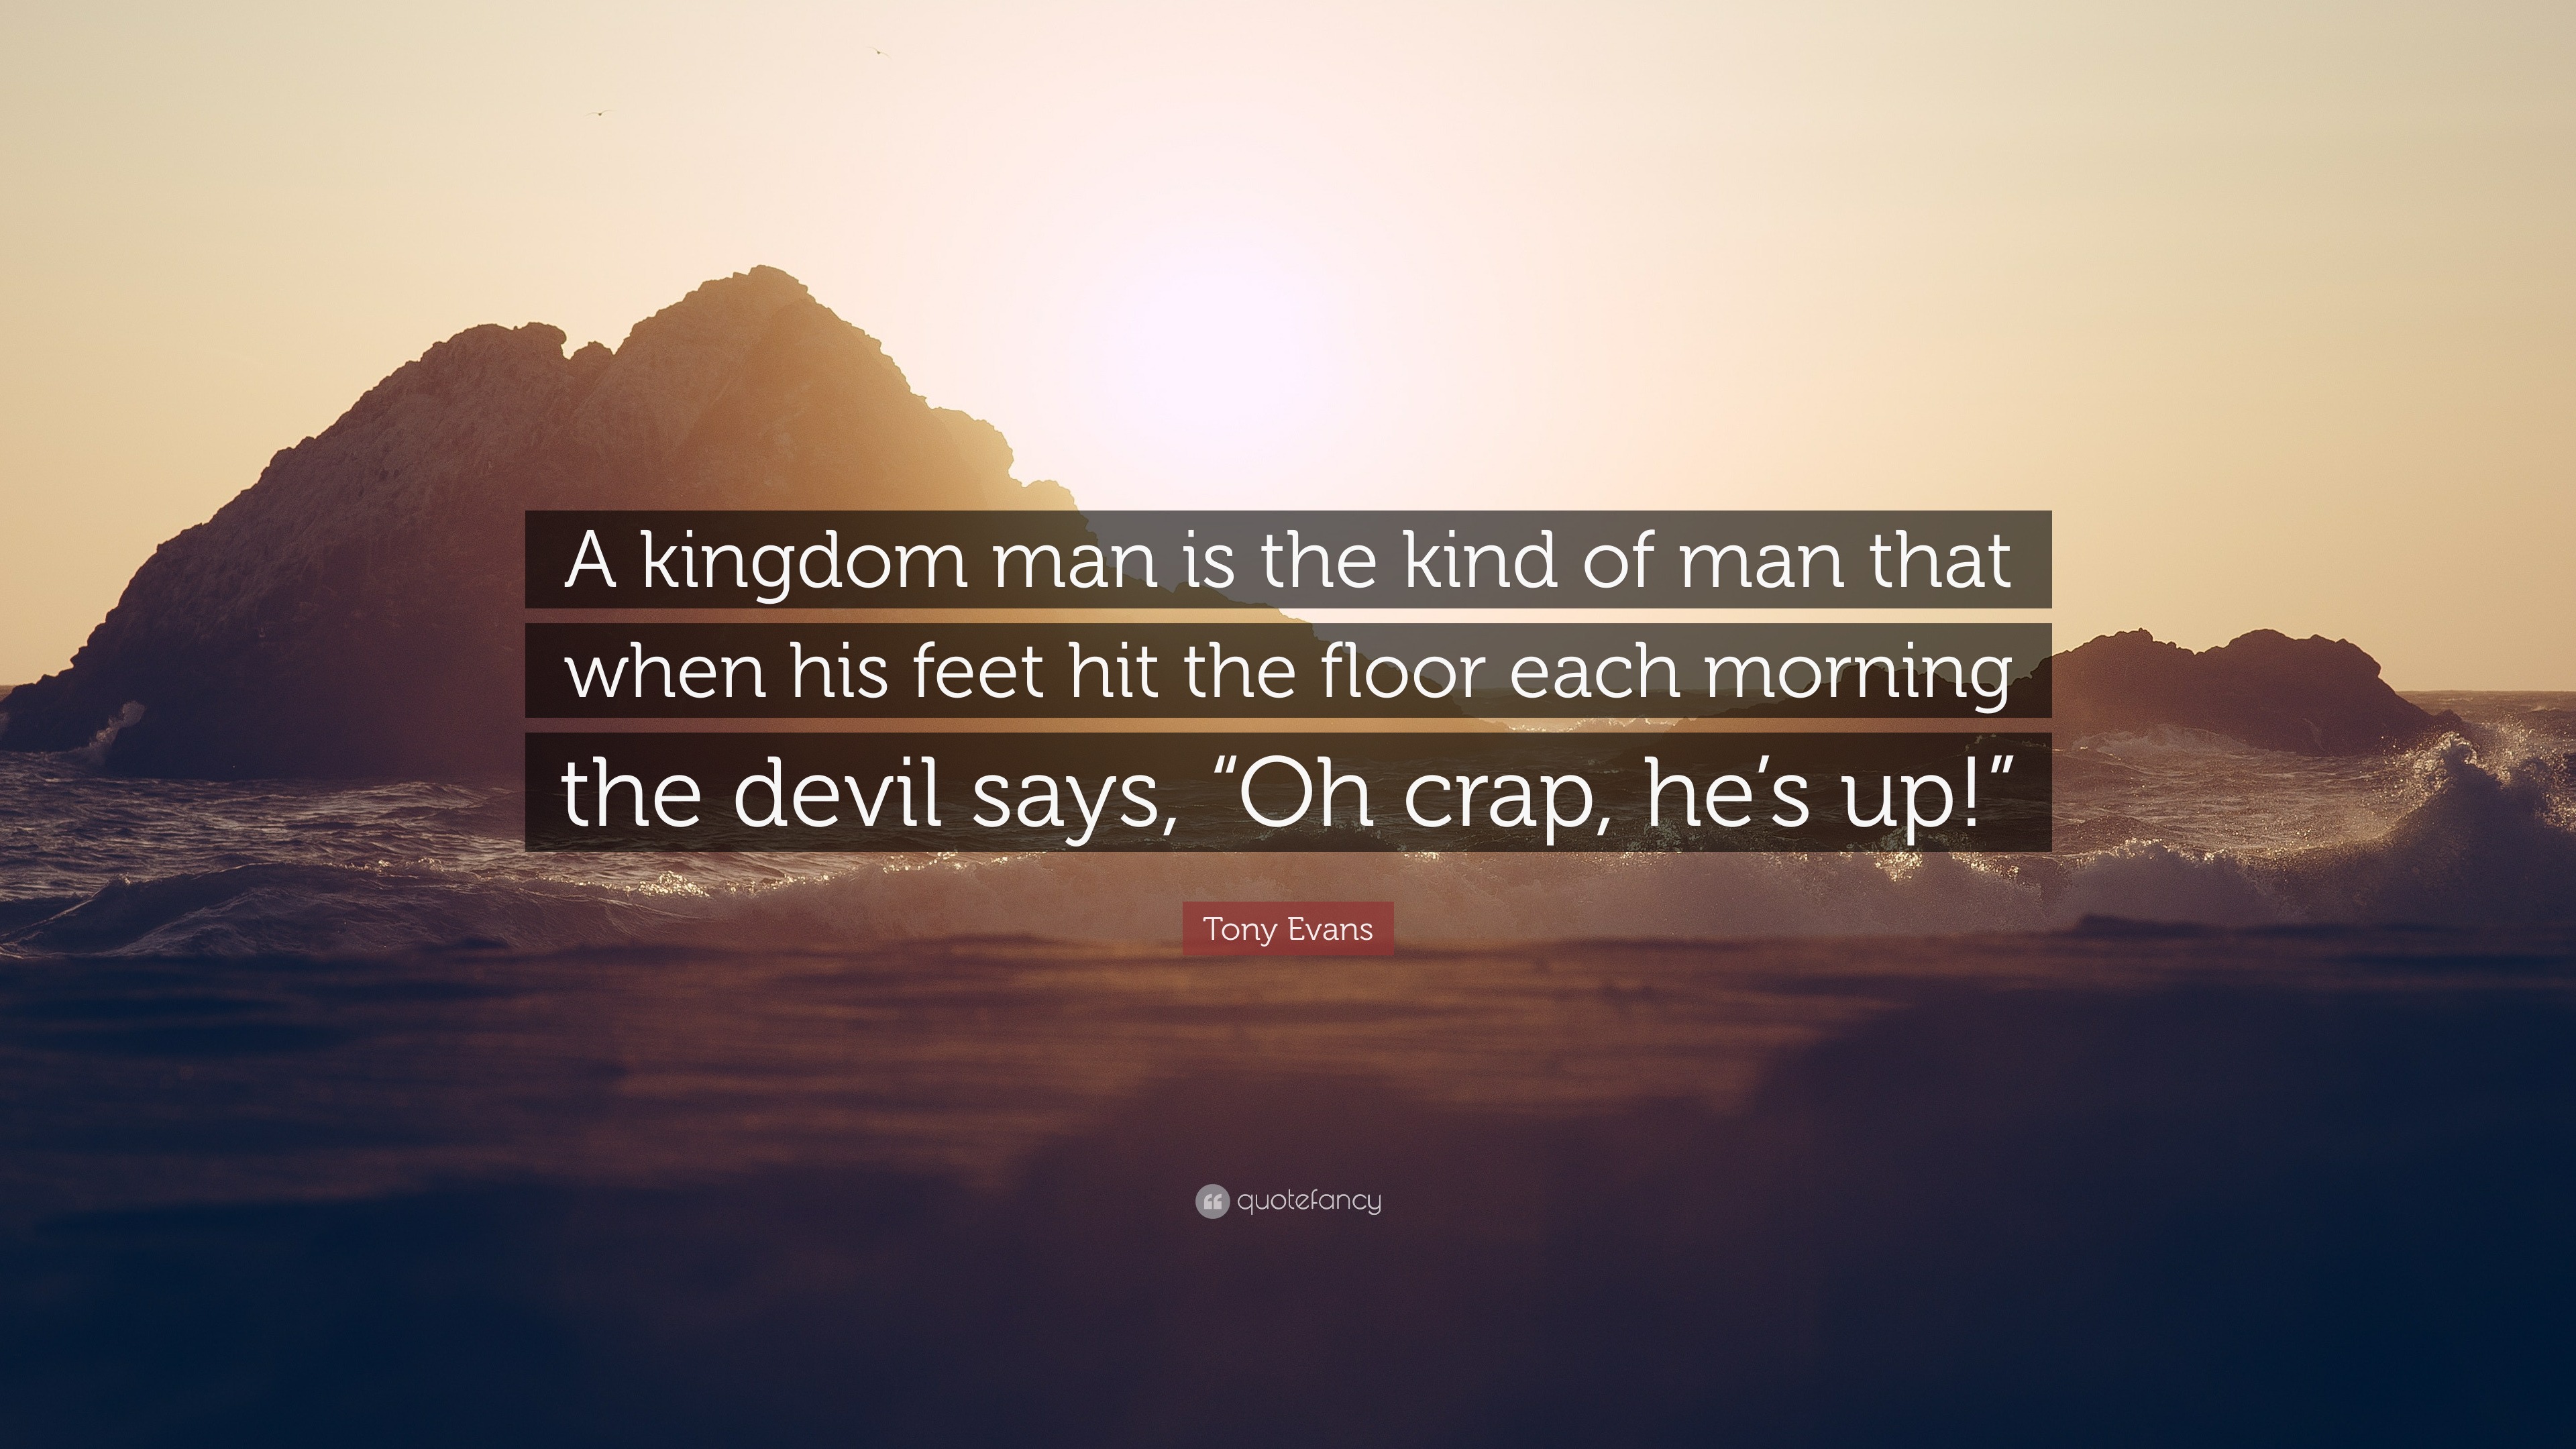 Tony Evans Quote “A kingdom man is the kind of man that